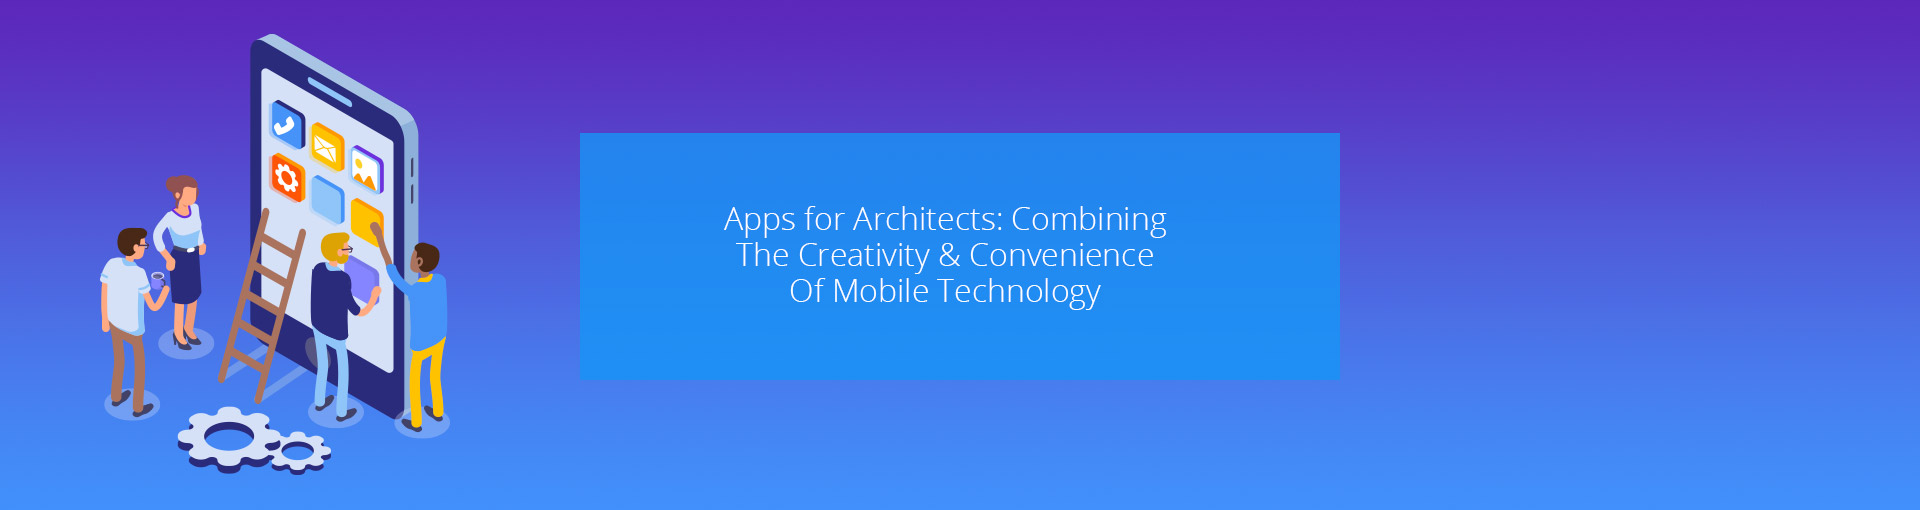 Apps for Architects: Combining The Creativity & Convenience Of Mobile Technology